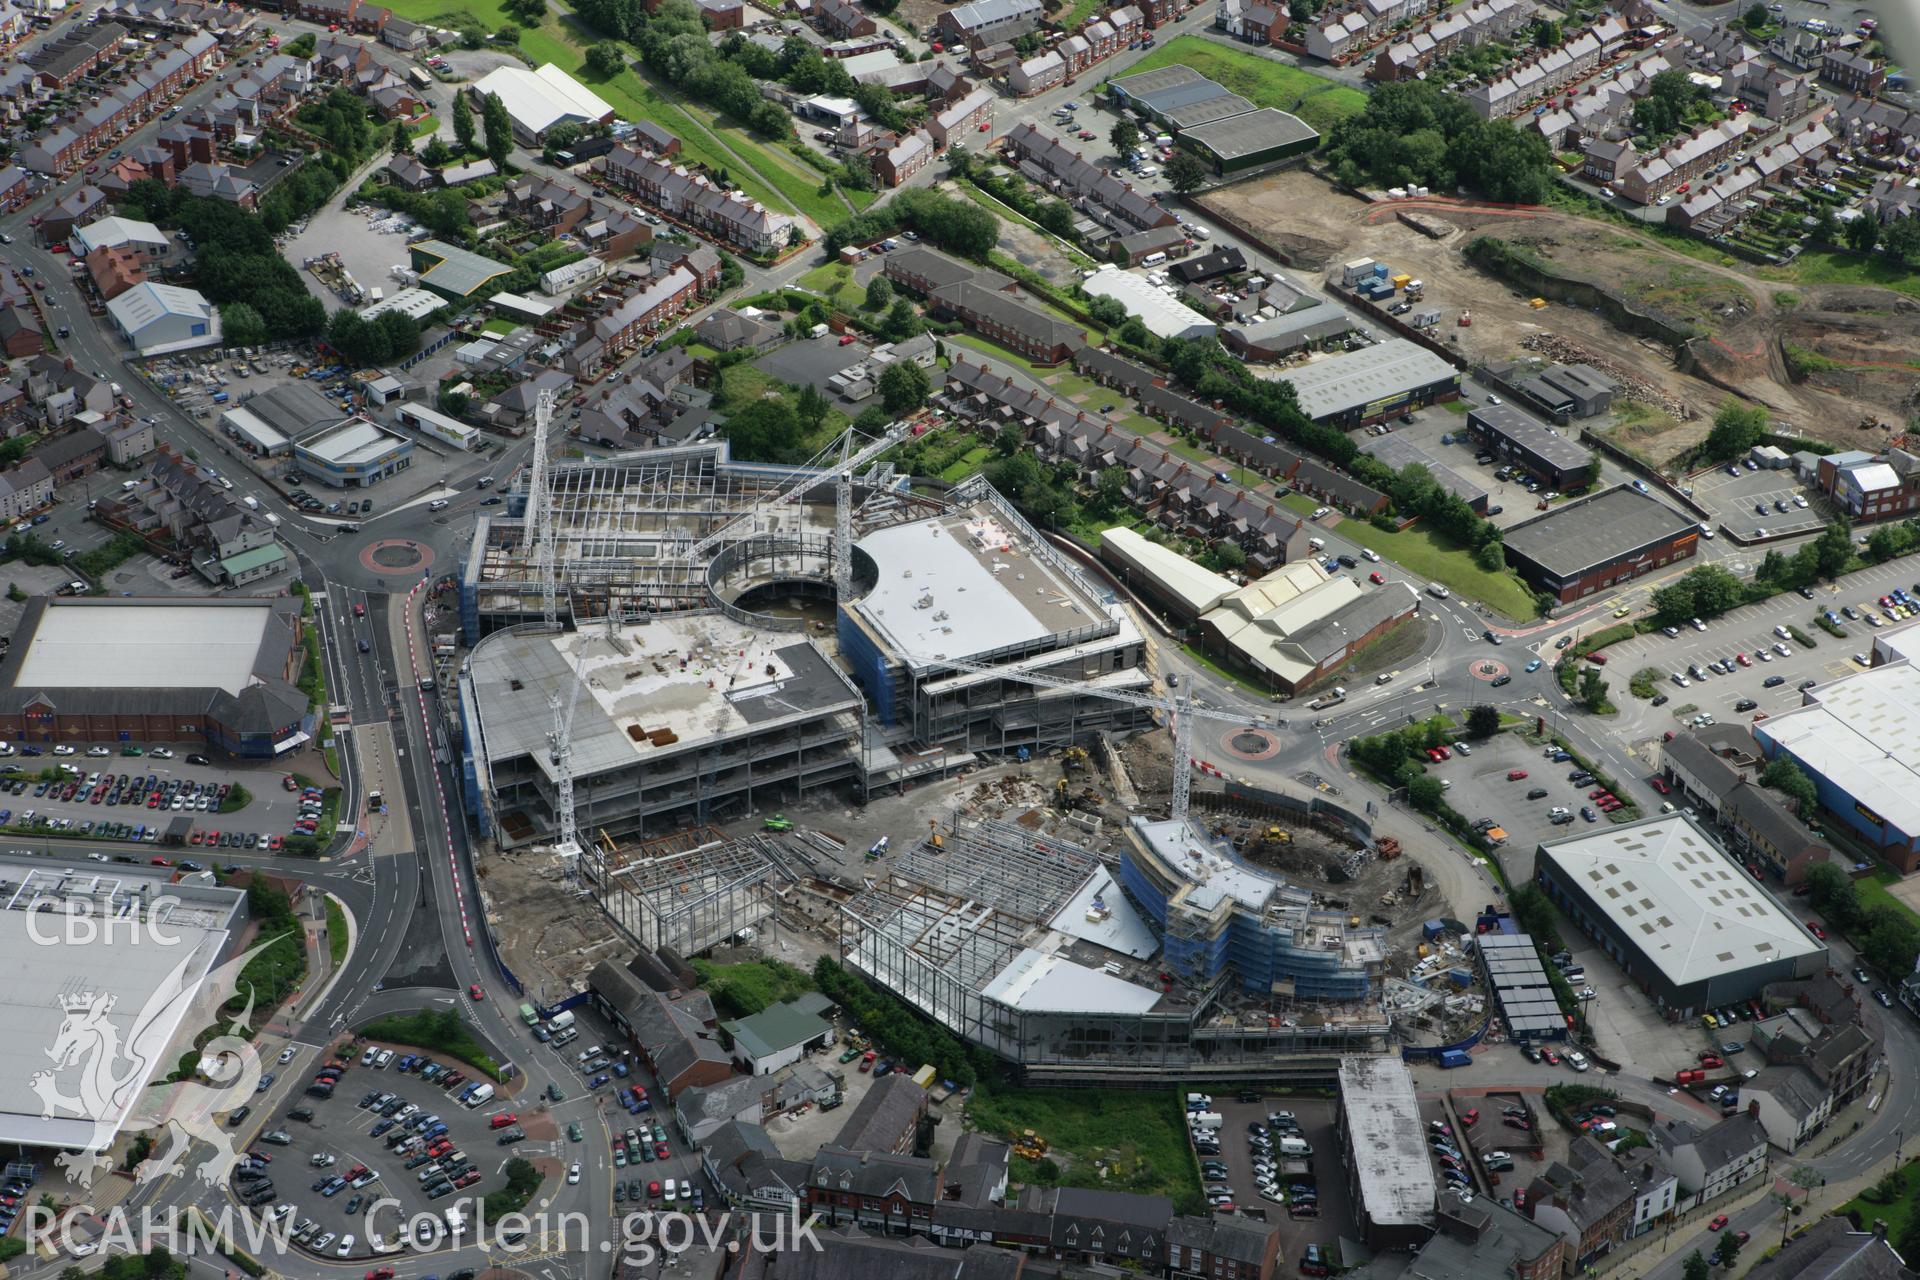 RCAHMW colour oblique aerial photograph of Wrexham, showing construction of a new shopping centre. Taken on 24 July 2007 by Toby Driver